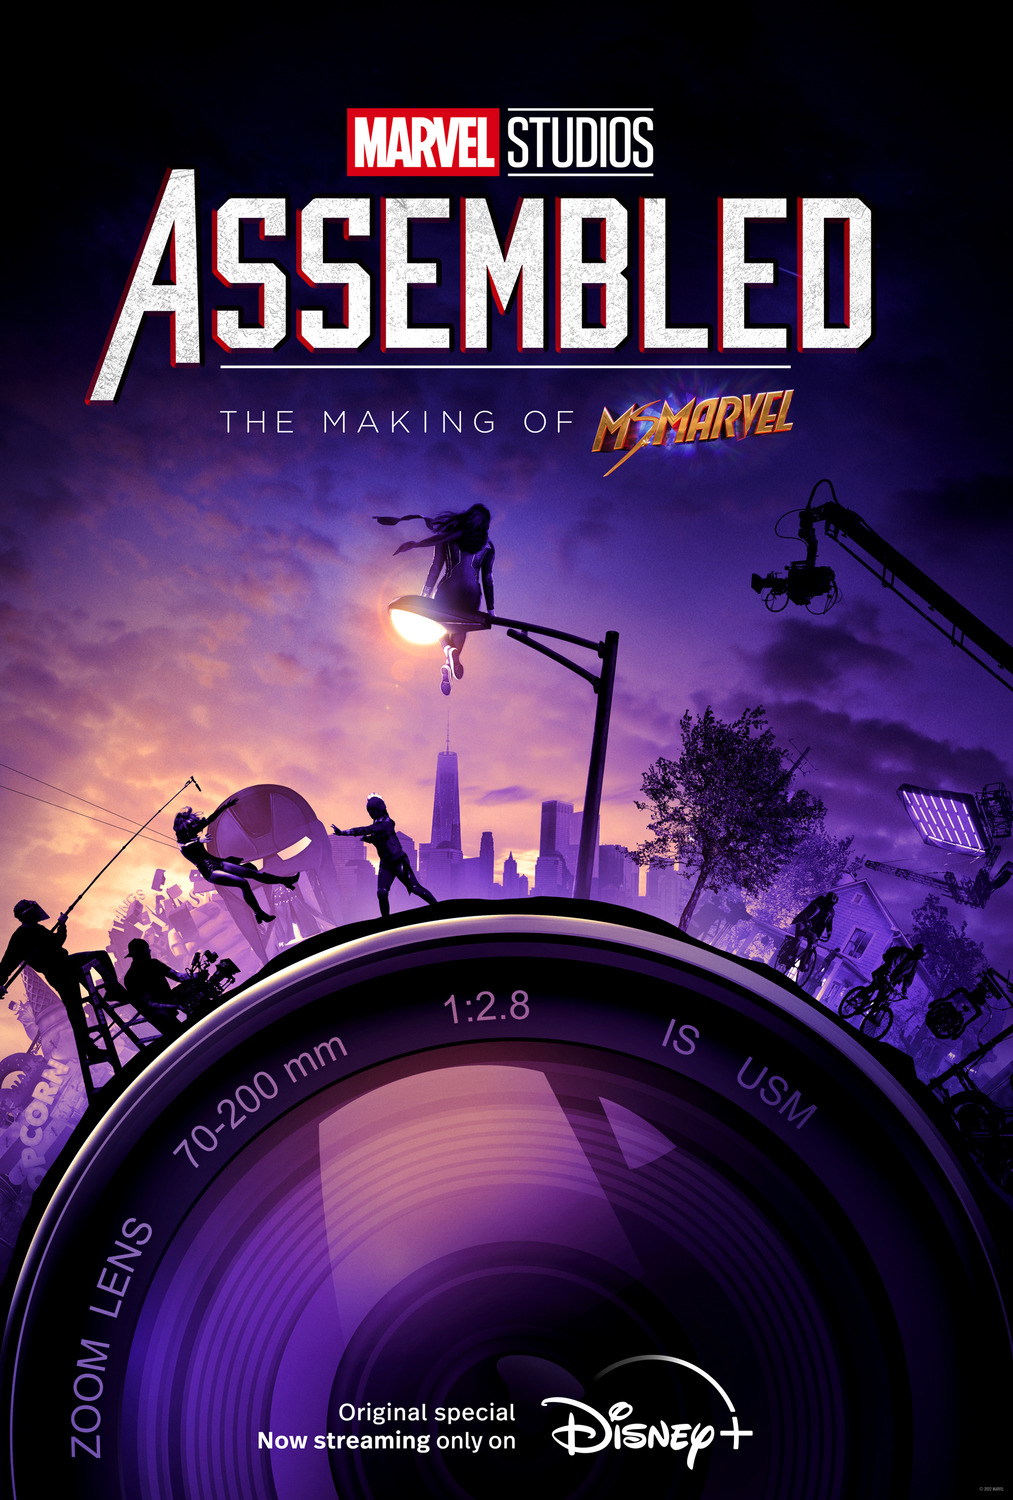 Extra Large Movie Poster Image for Marvel Studios: Assembled (#11 of 12)